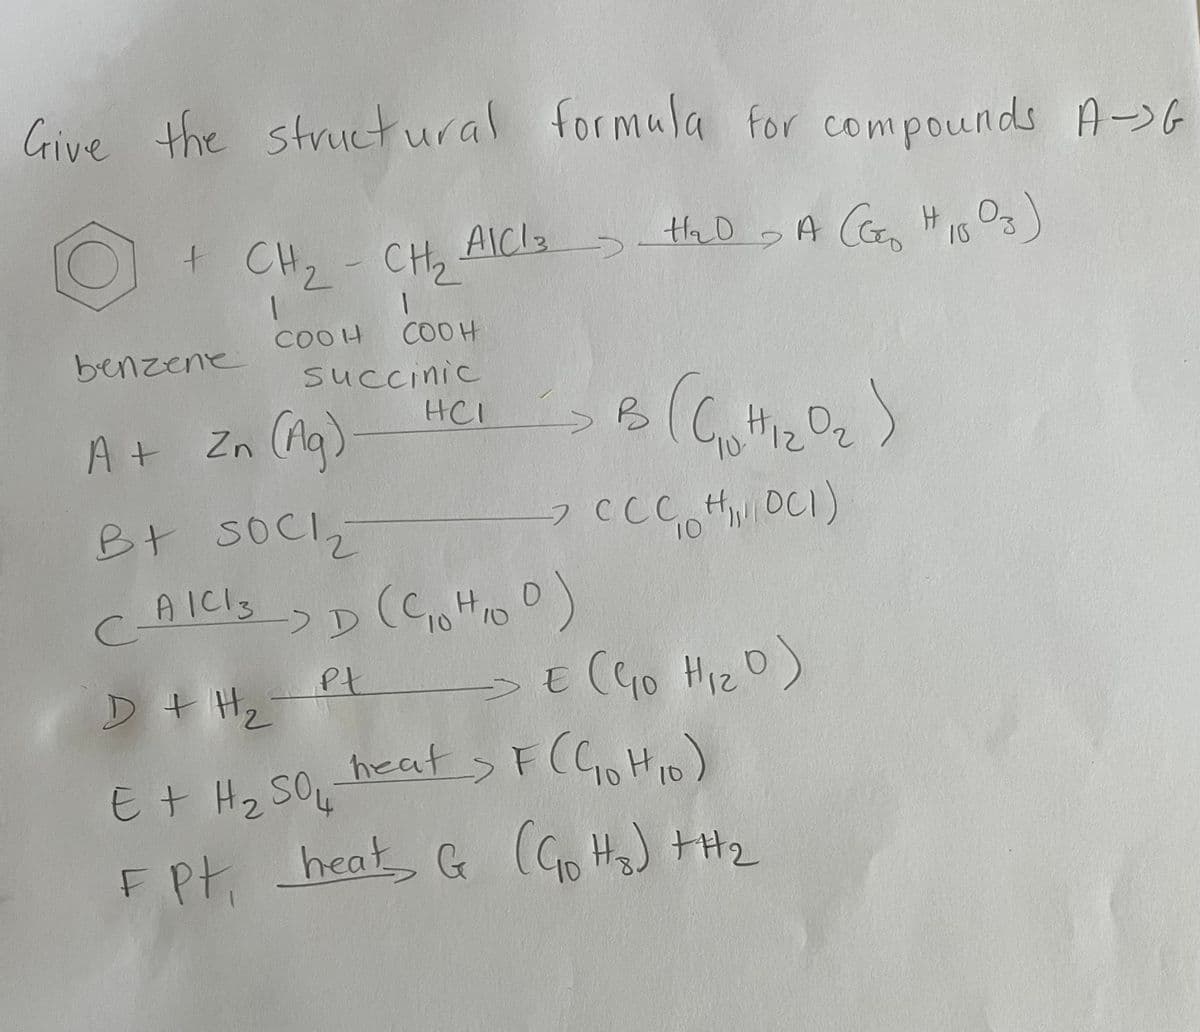 Give the structural formula for compounds A->G
>
+ CH₂ - CH₂ AICI 3 > H₂D A CEE H1003)
->
1
COOH
benzene
A +
COOH
succinic
Zn (Ag)
HCI
B3 (Goth1₂0₂)
> CCC H₁, DC1)
10
B+ SOCI₂
C_AILIS-> D (C₁0HID D)
3
10
10
Pt
D + H₂
E + H ₂ SO 4
C
F Pt, heat & (G₂₁H₂) +H₂
G
€ (G₁0 H₁₂0)
Hiz
E
heat > F (C₁0H₁0)
10